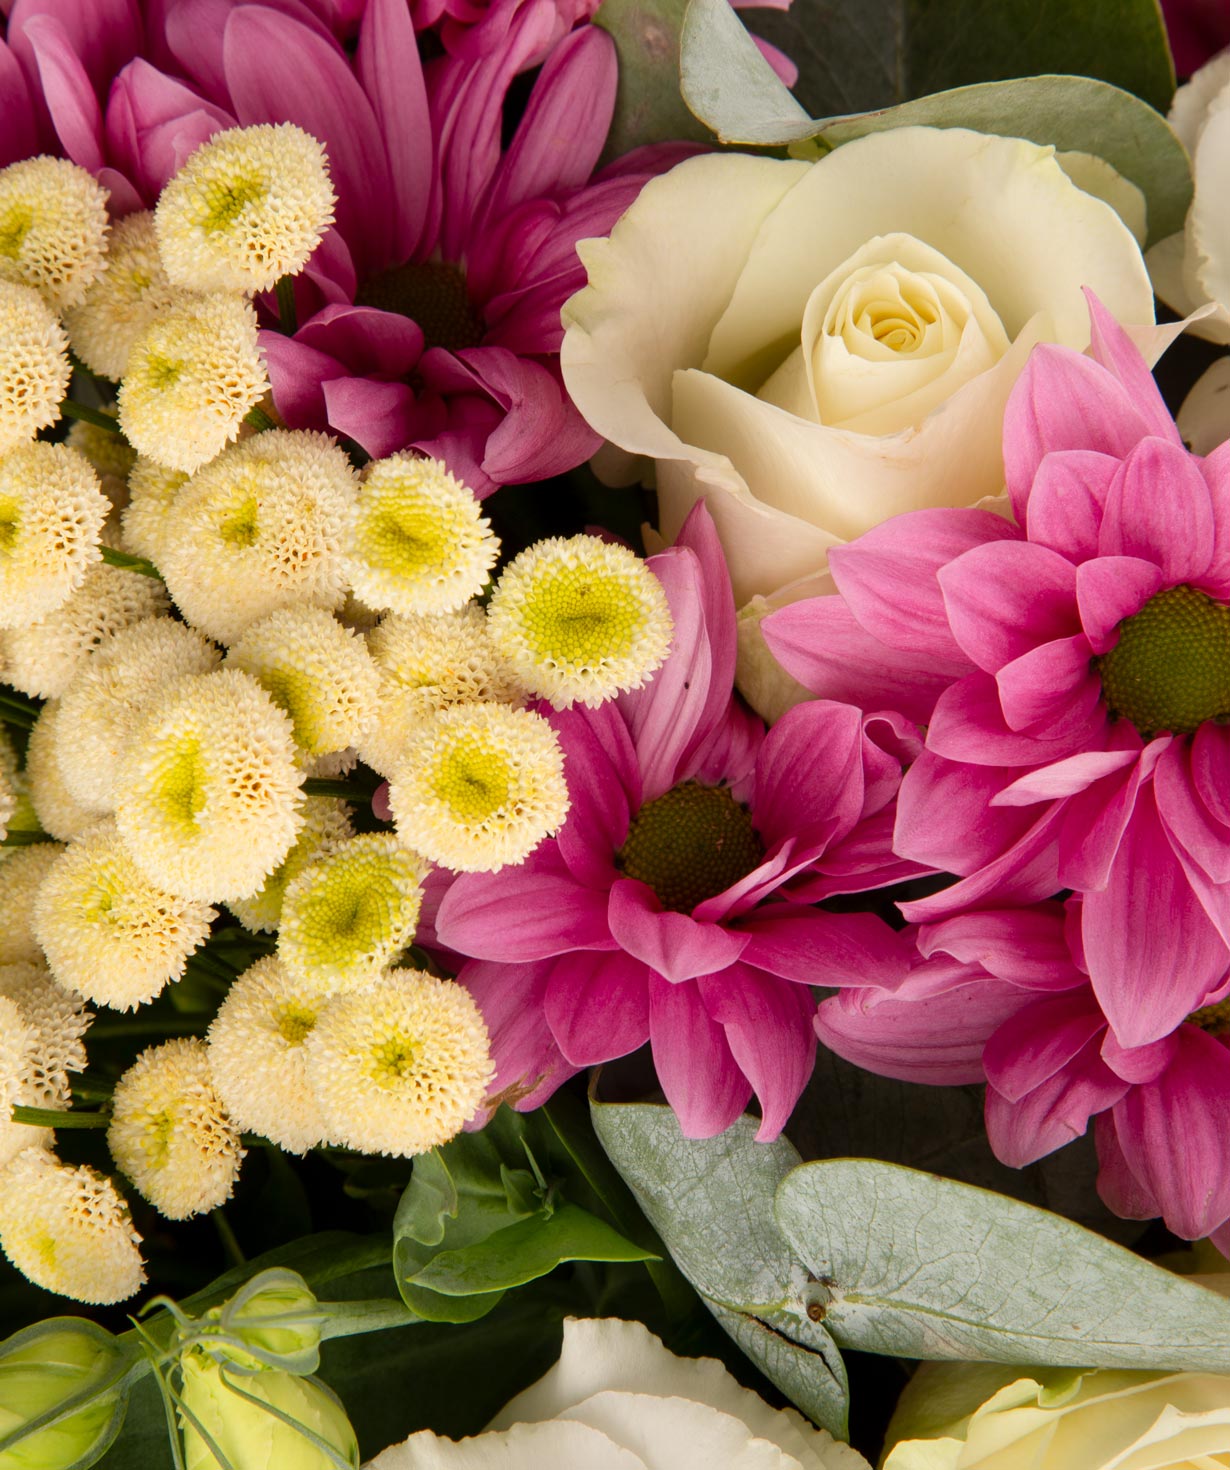 Bouquet `Glarus` with roses, chrysanthemums and lisianthus